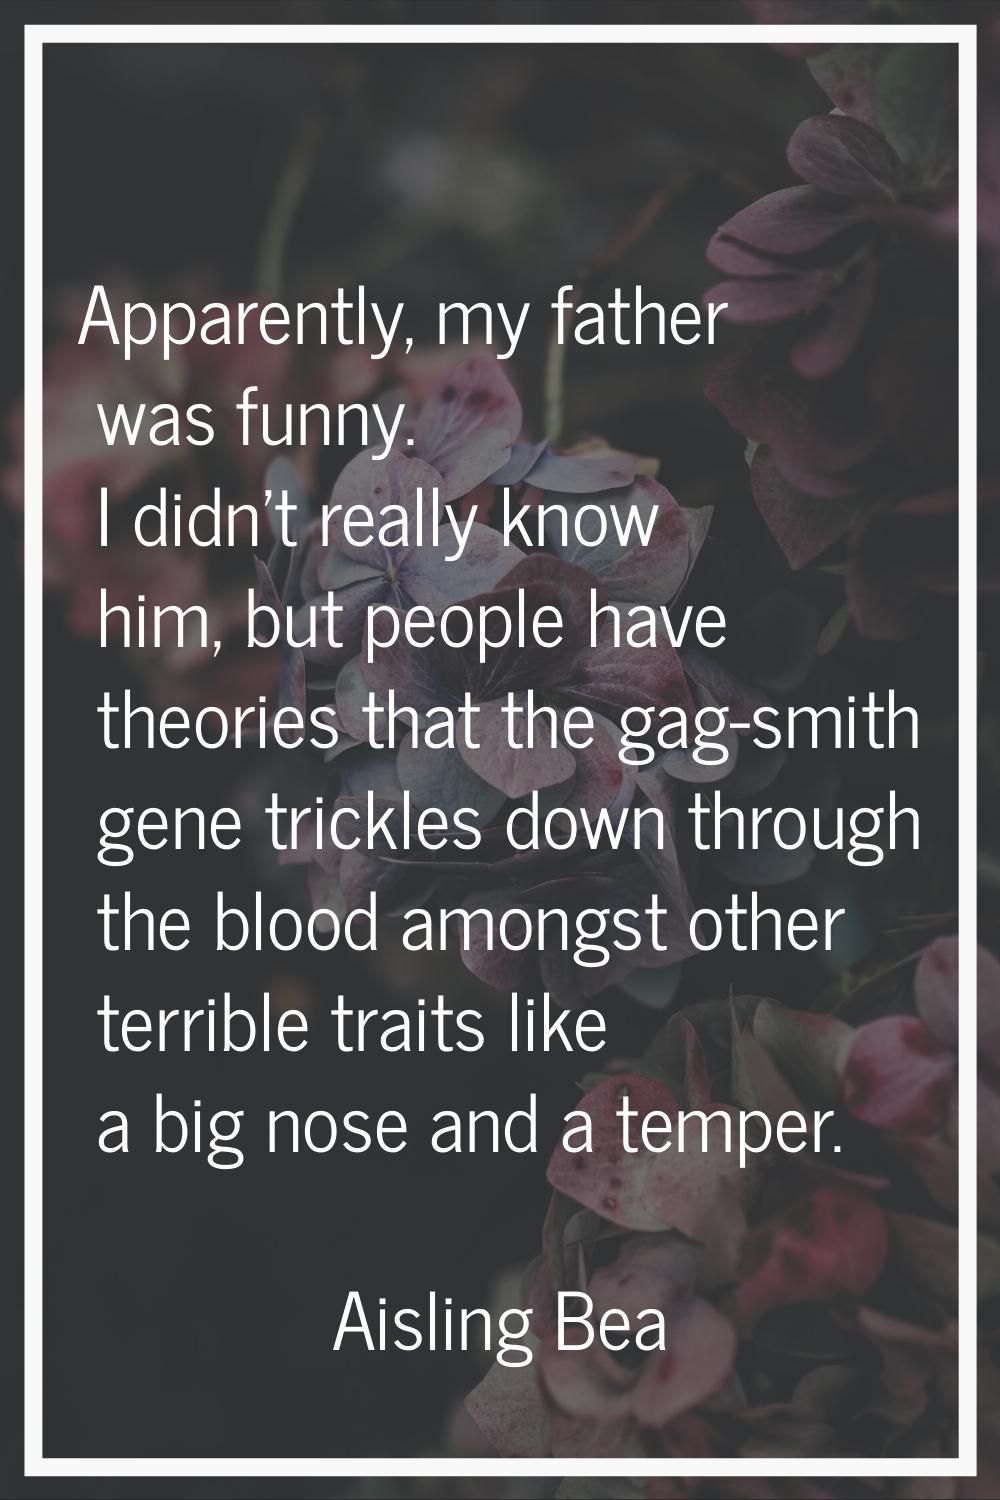 Apparently, my father was funny. I didn't really know him, but people have theories that the gag-sm